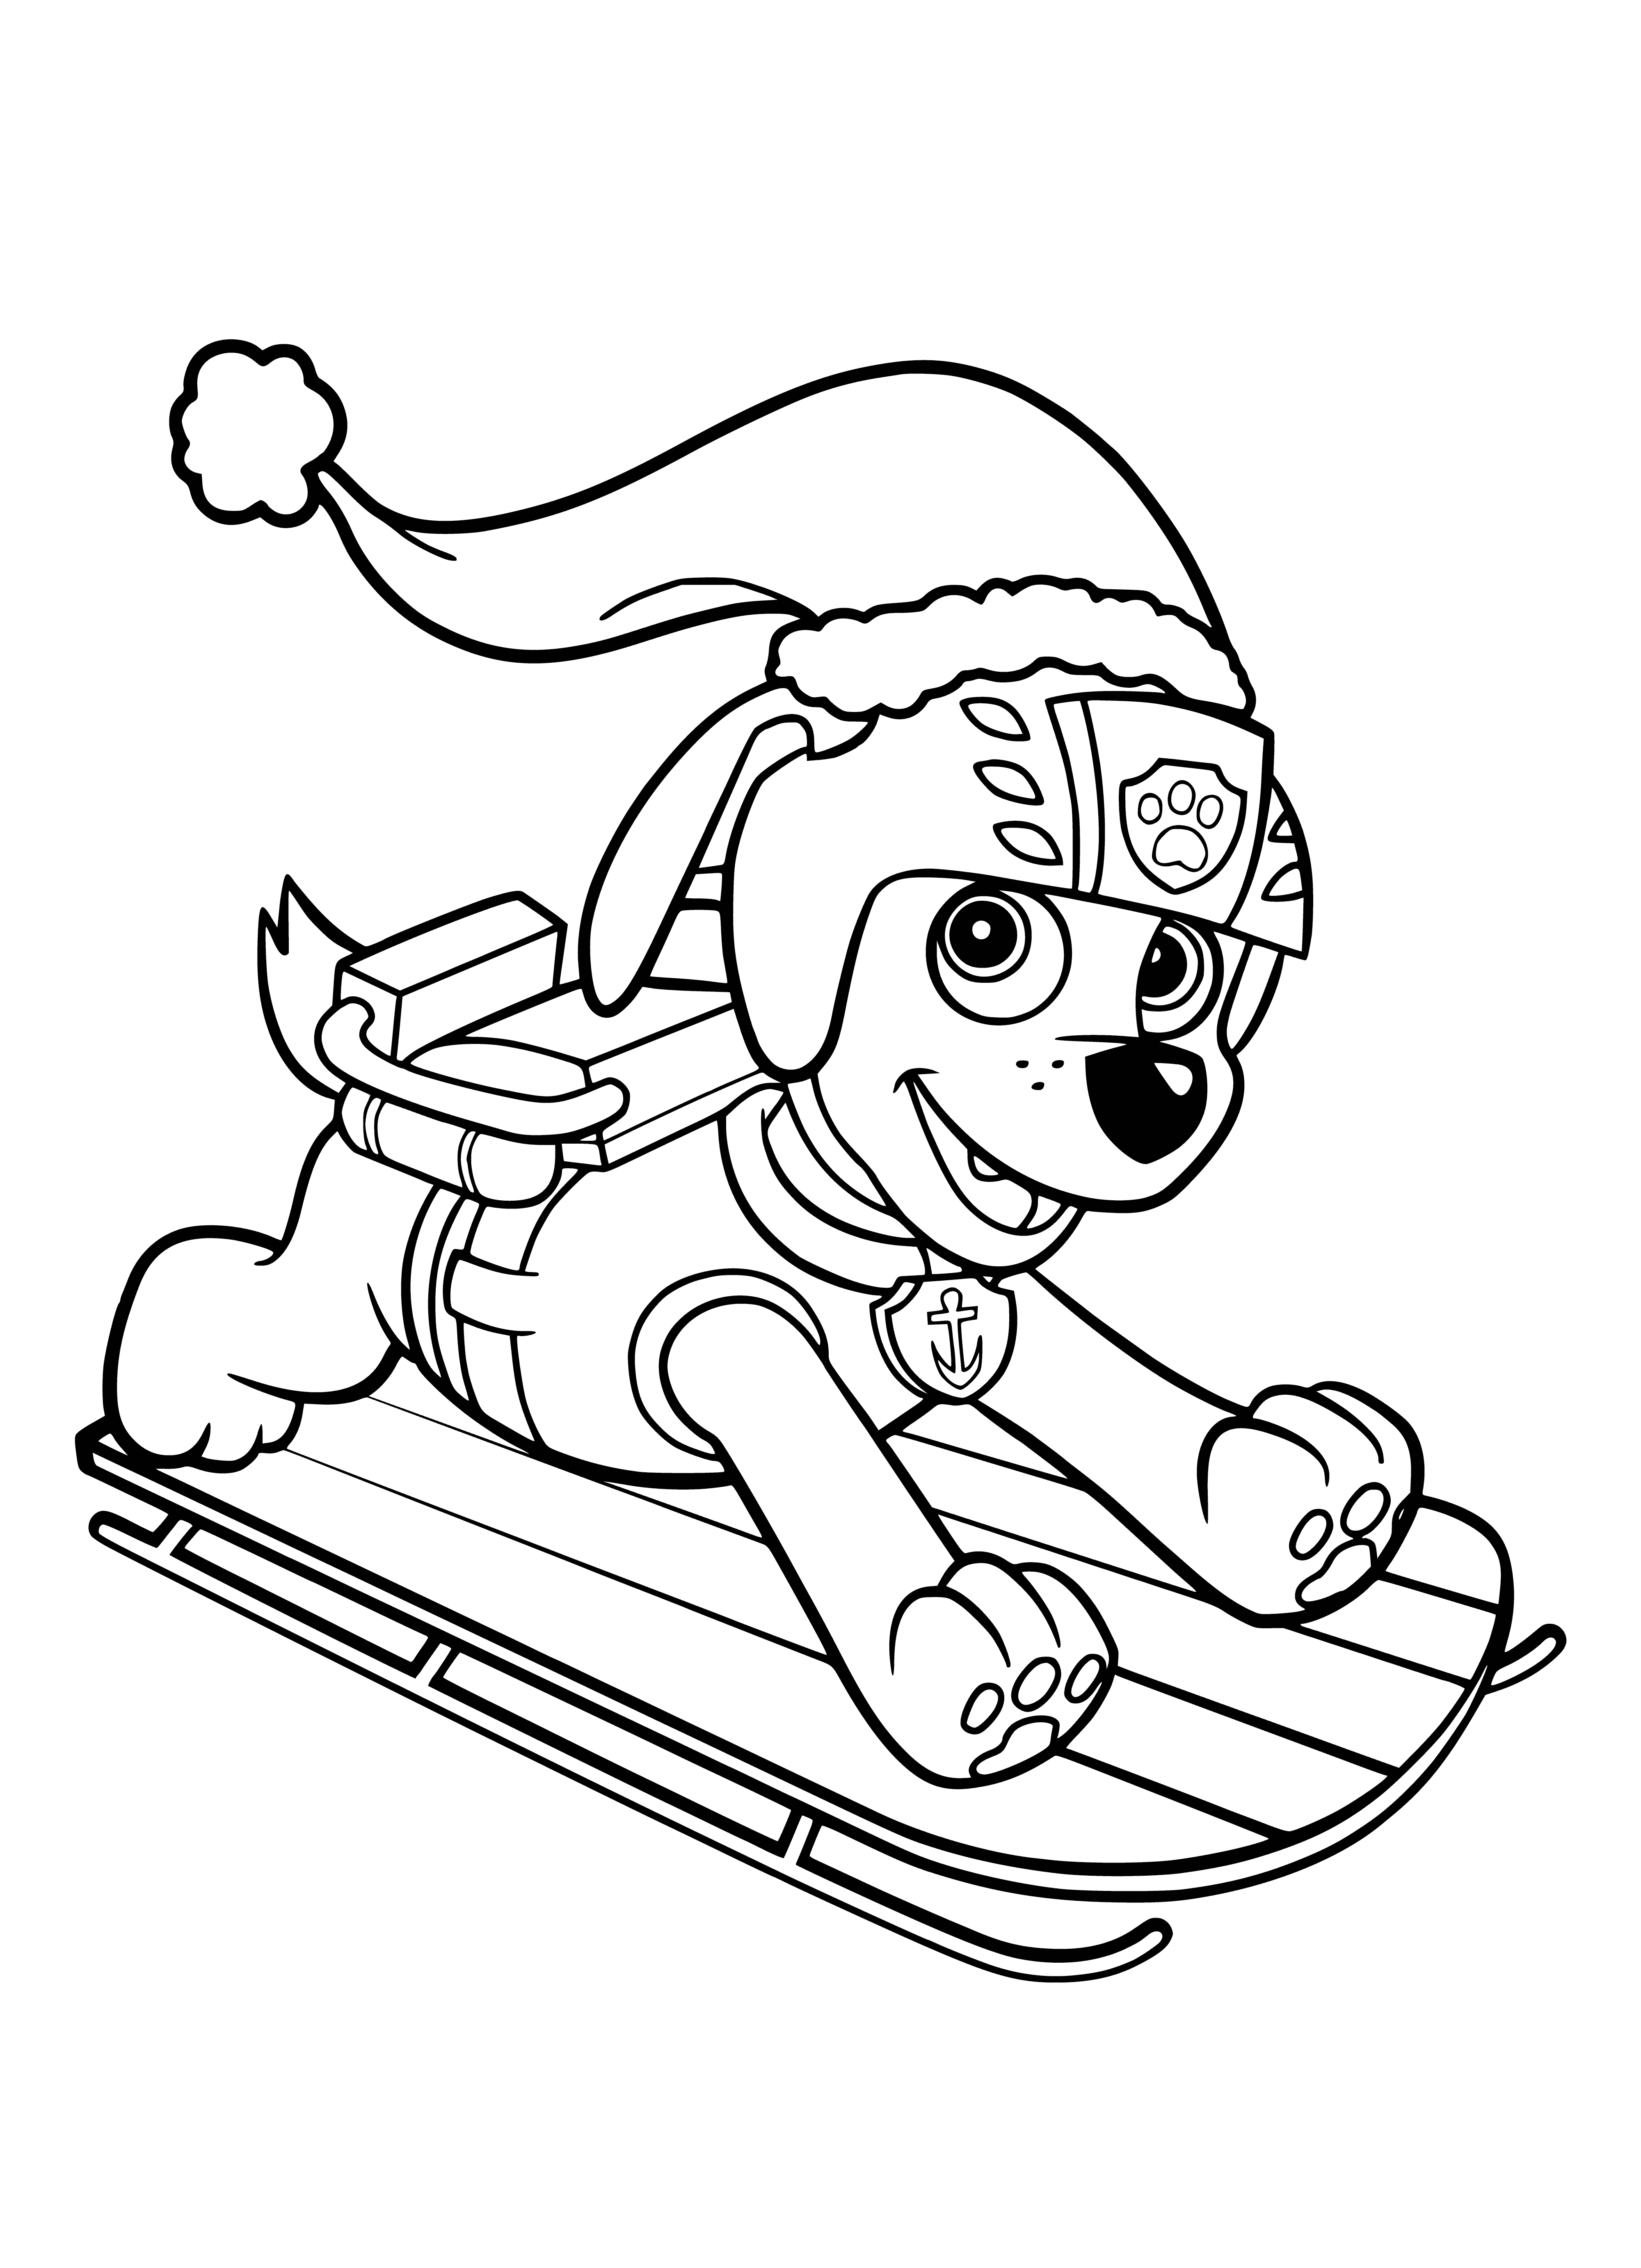 coloring page: Captain Halibut is a pup on the PAW Patrol wearing a blue and white uniform with a gold badge and blue helmet with a white star. He's ready to save the day with fishing rod in paw!